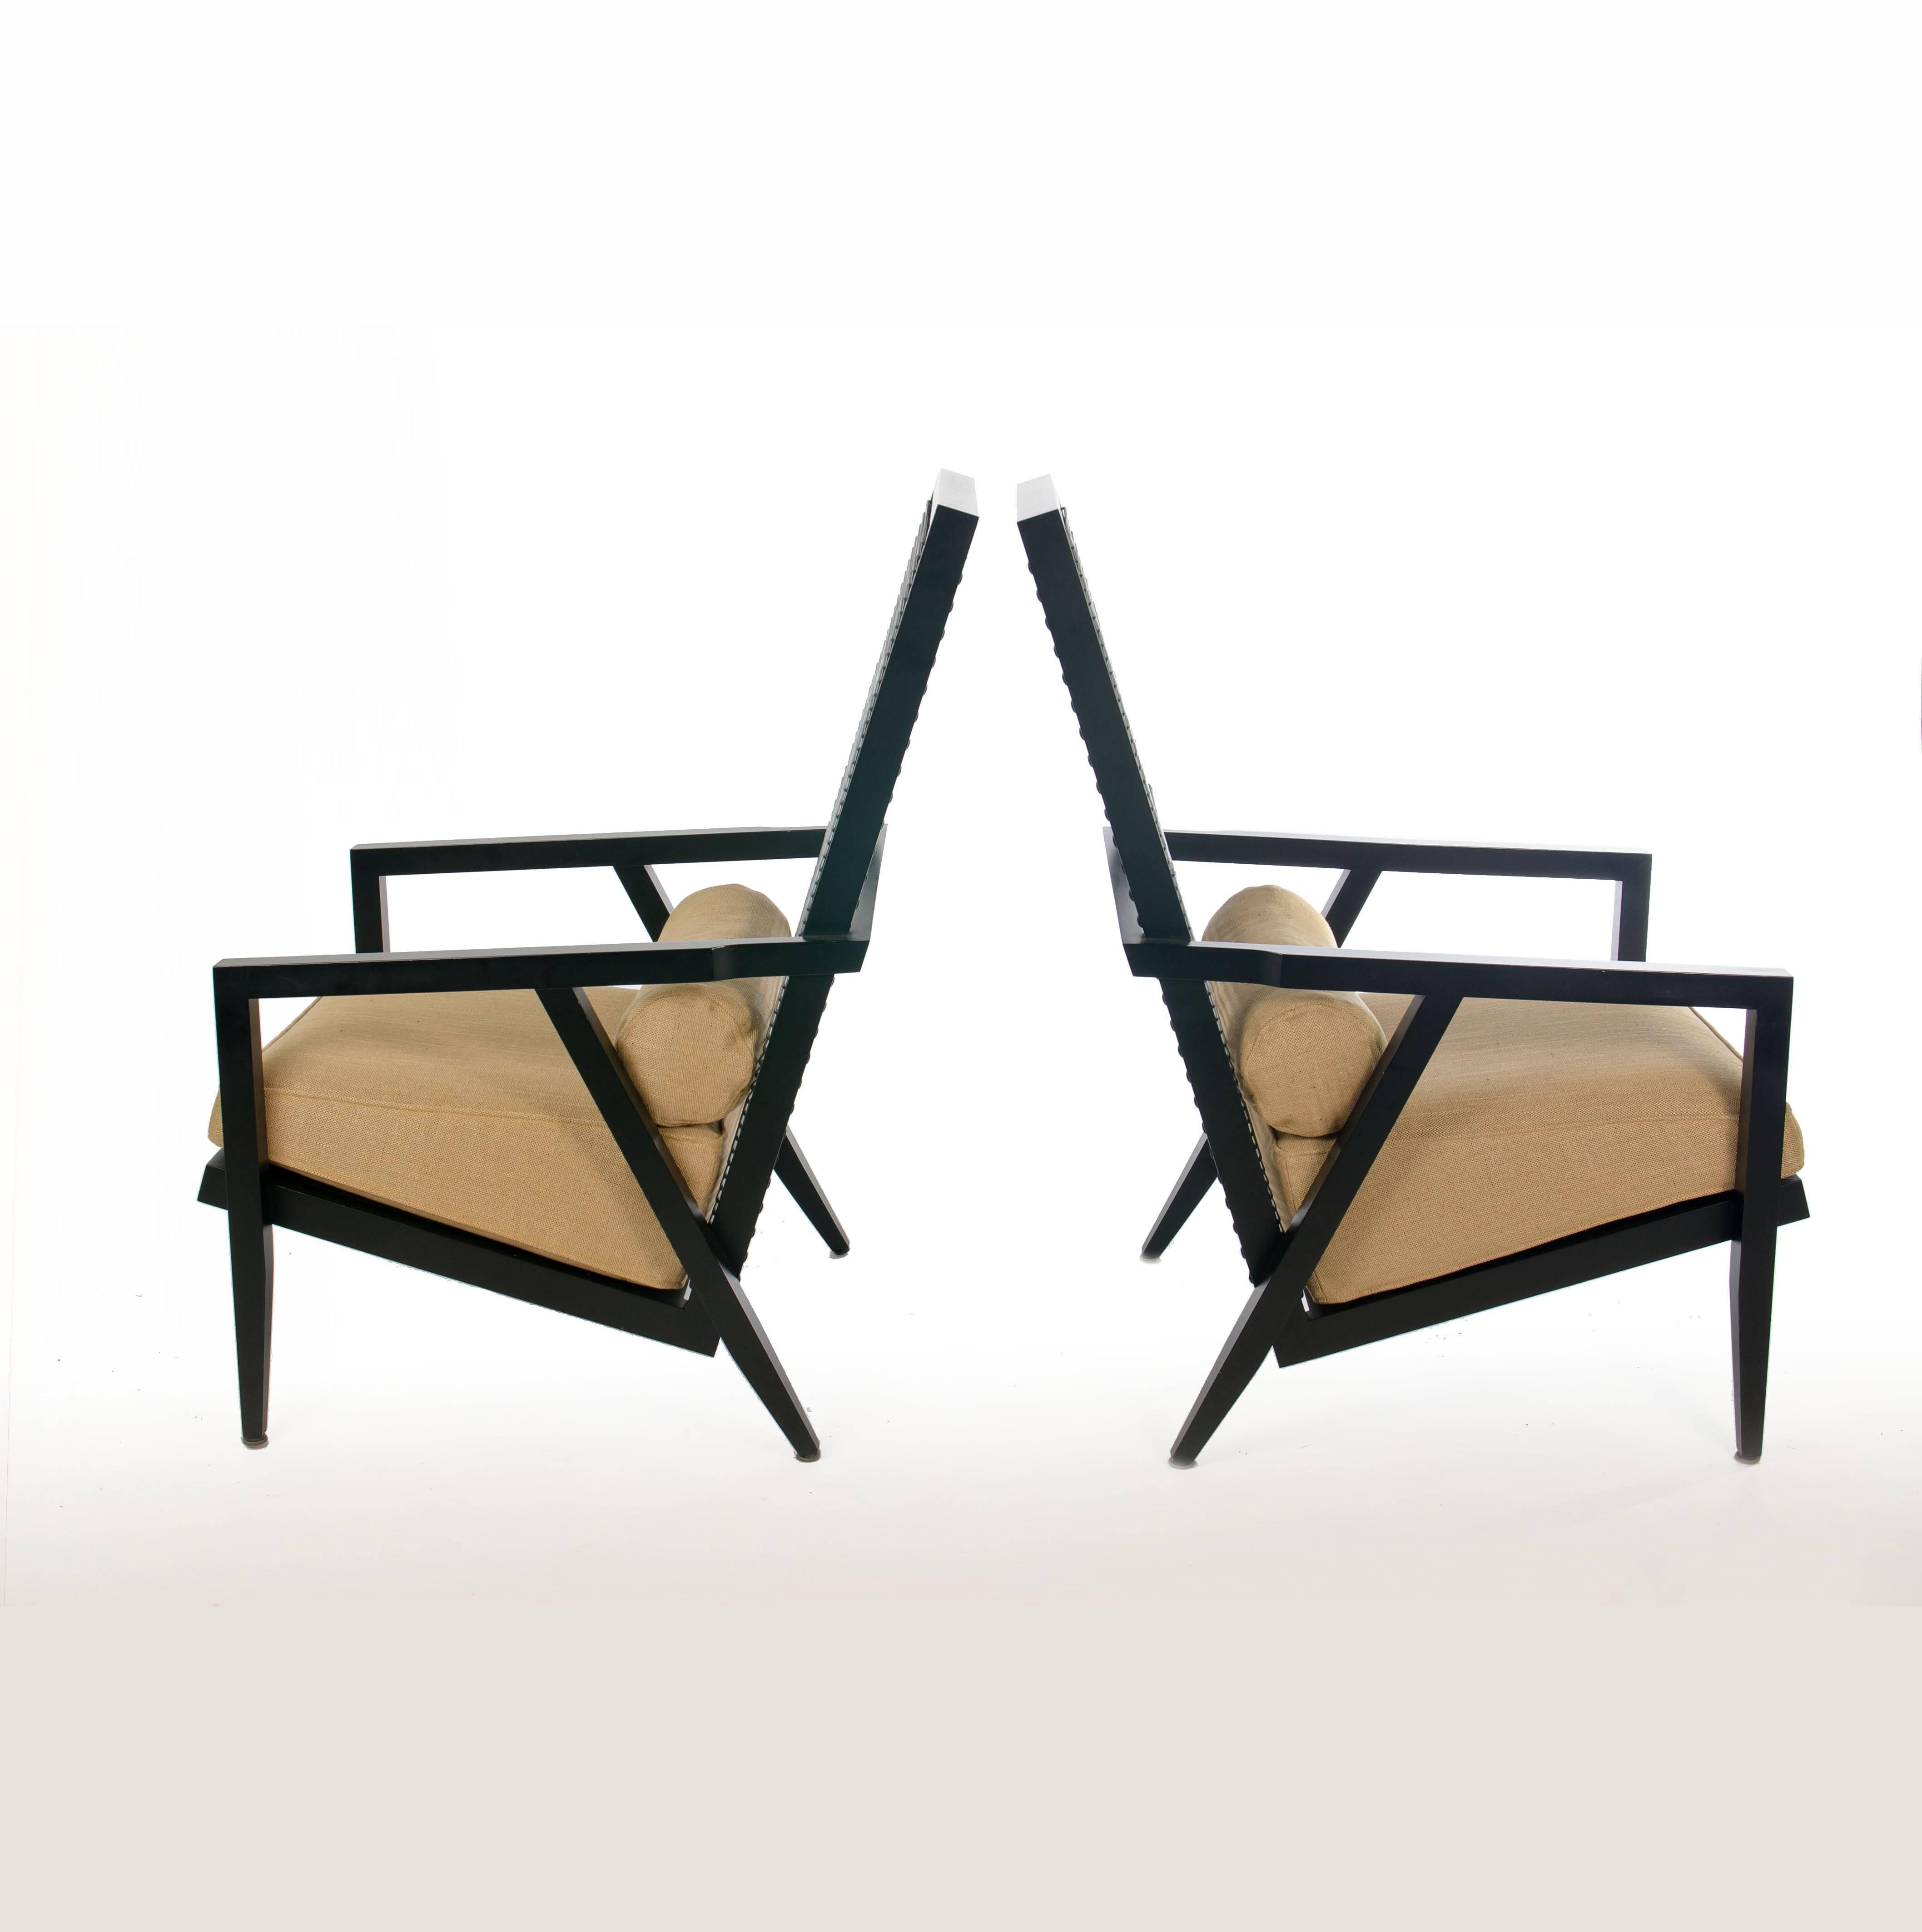 Two labelled Astoria high back lounge chair designed by Franco Bizzozzero manufactured by Pierantonio Bonacina, Italy, 2000s. Stained wood, leather cord. Leather; Metal label.

Pierantonio Bonacina is very representative of his work and his love